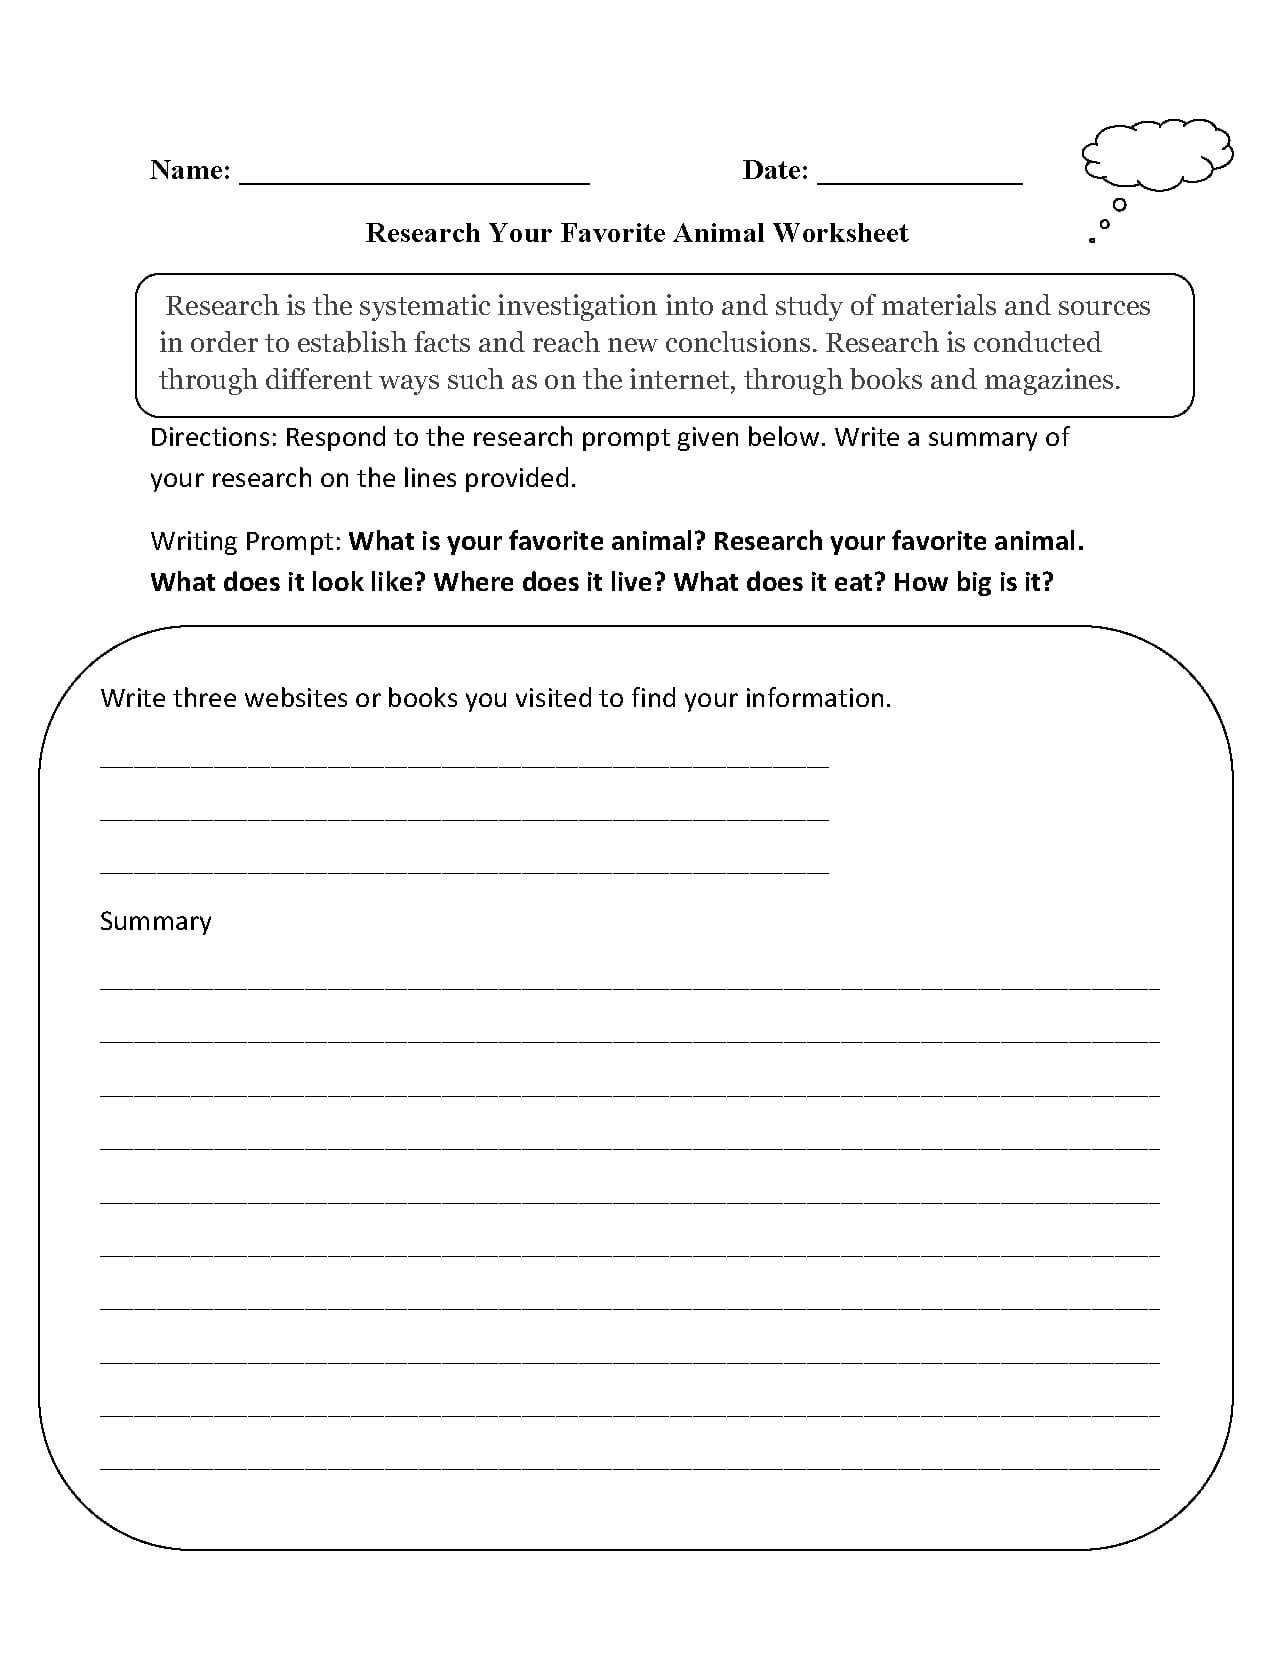 how to do research worksheet